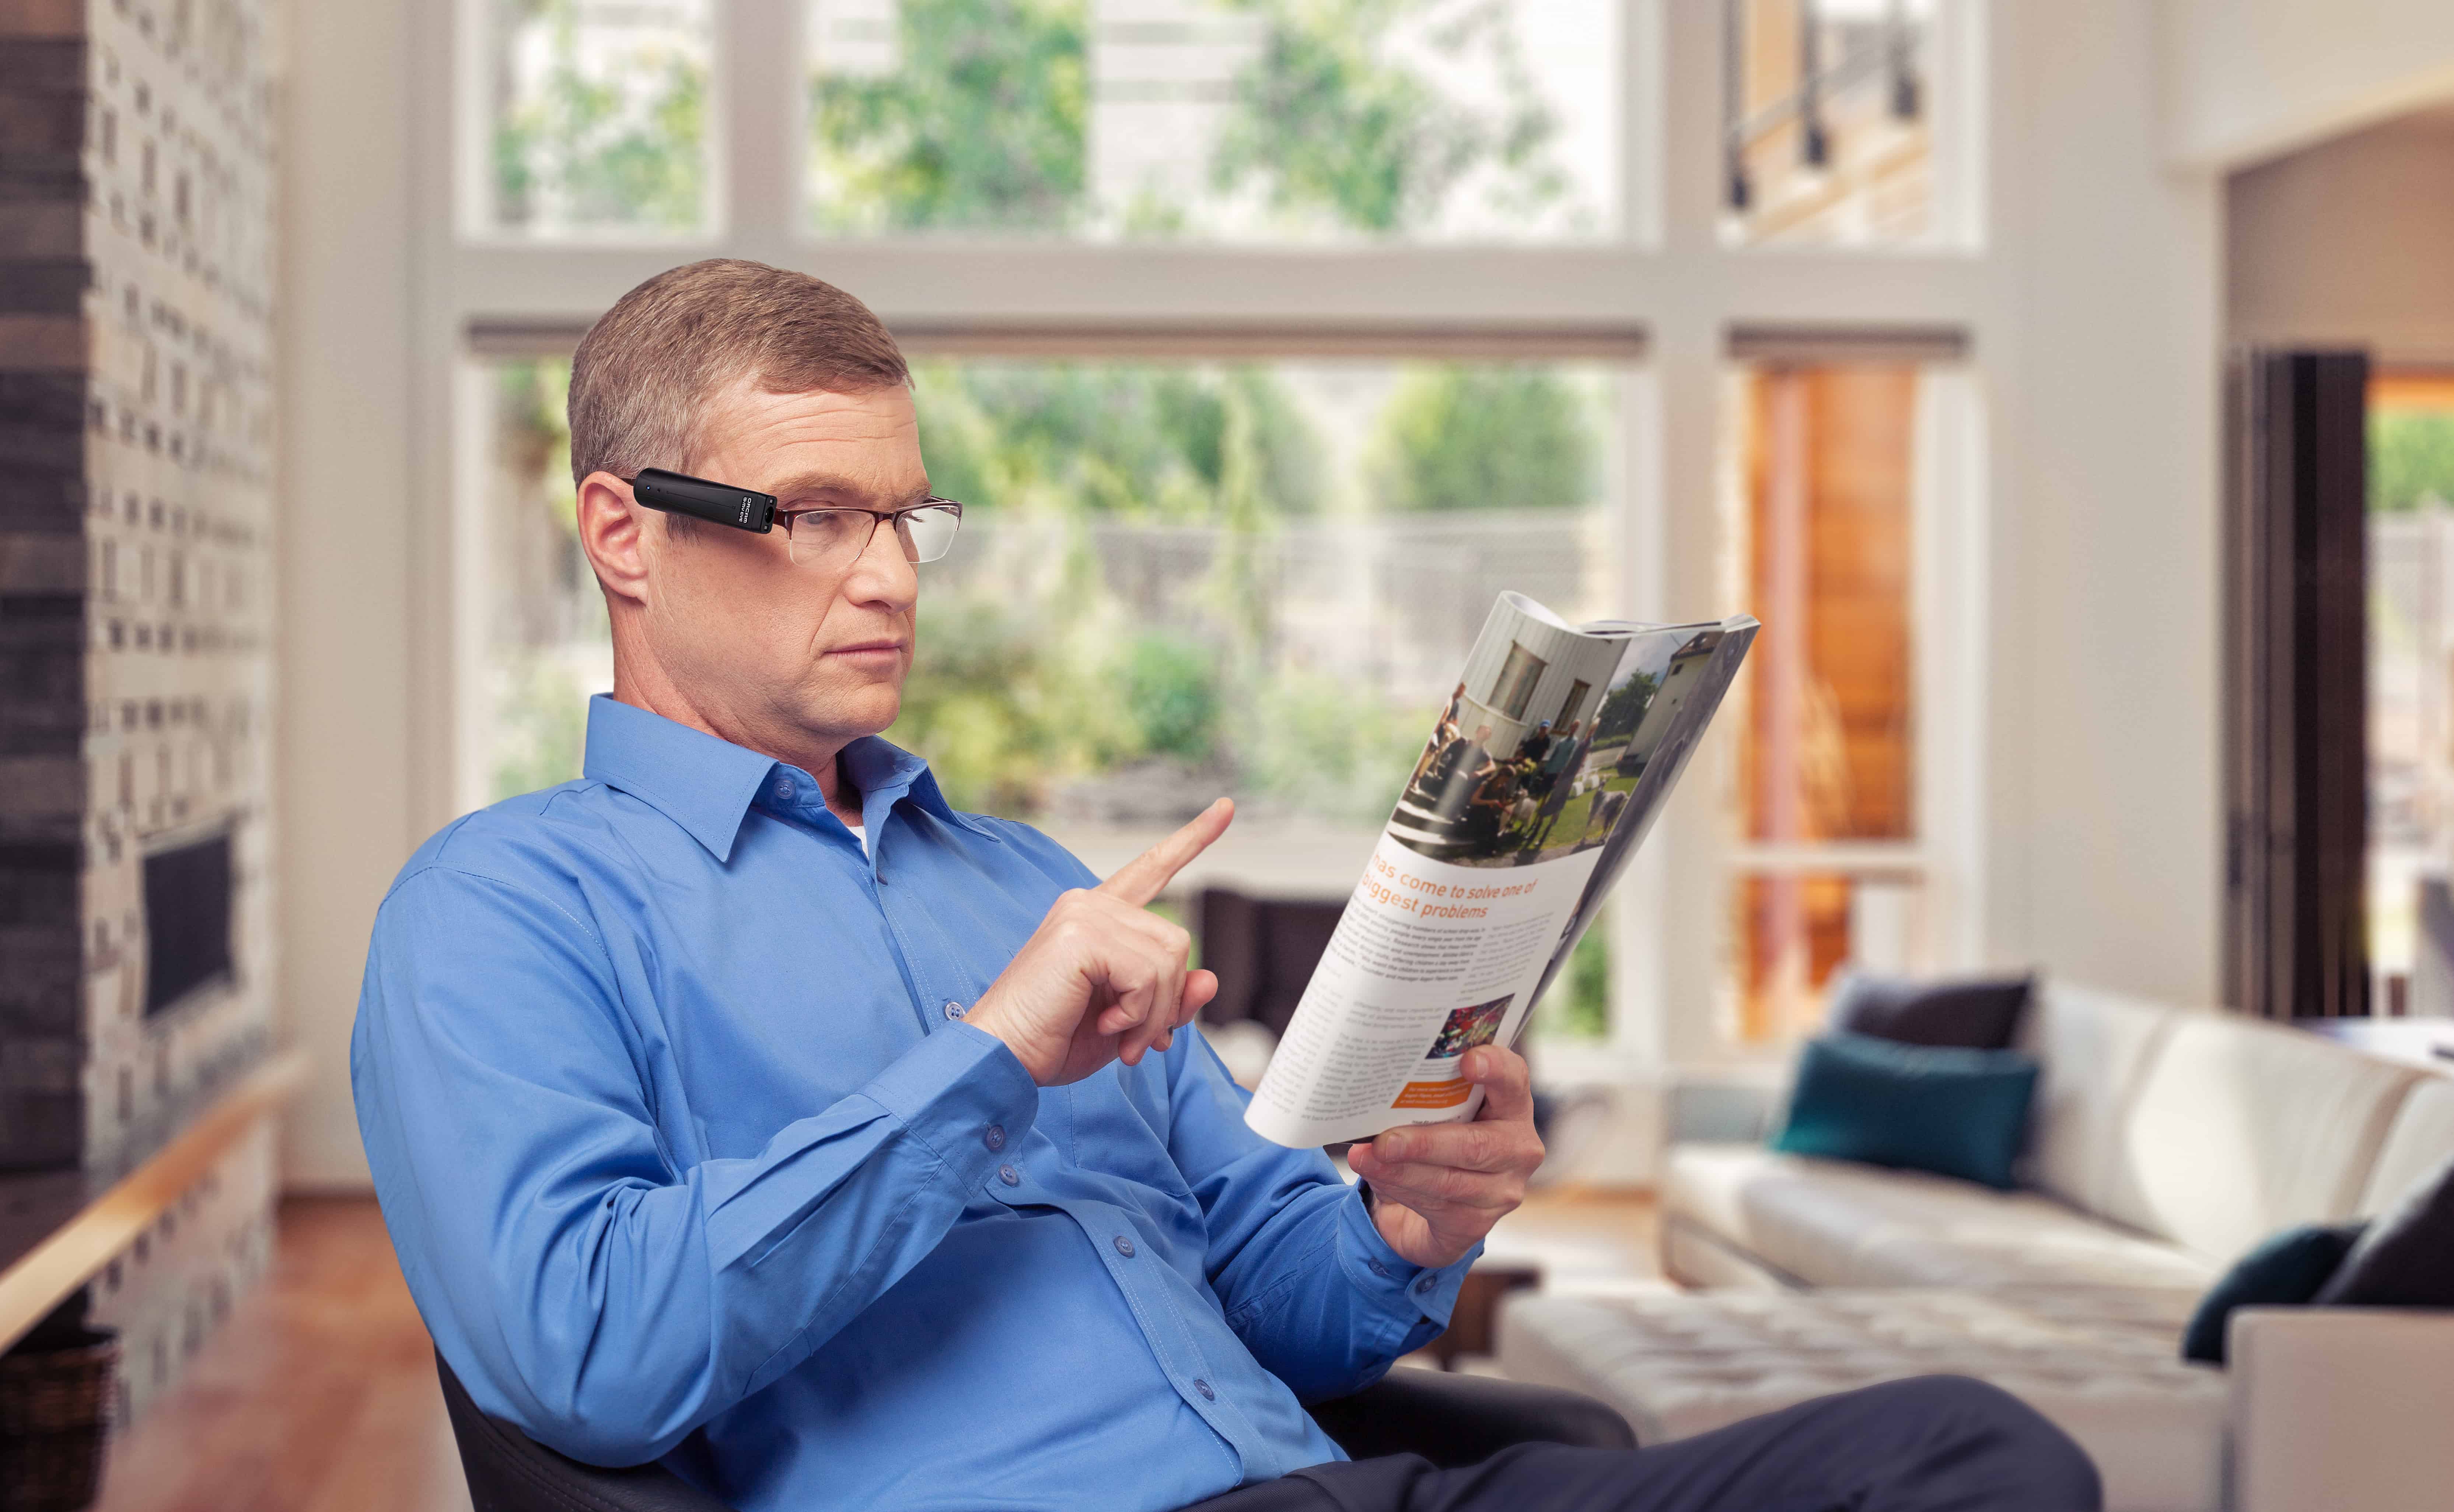 A man wearing OrCam's MyEye2 points to a position on a magazine to have it read aloud to an earpiece he is wearing.